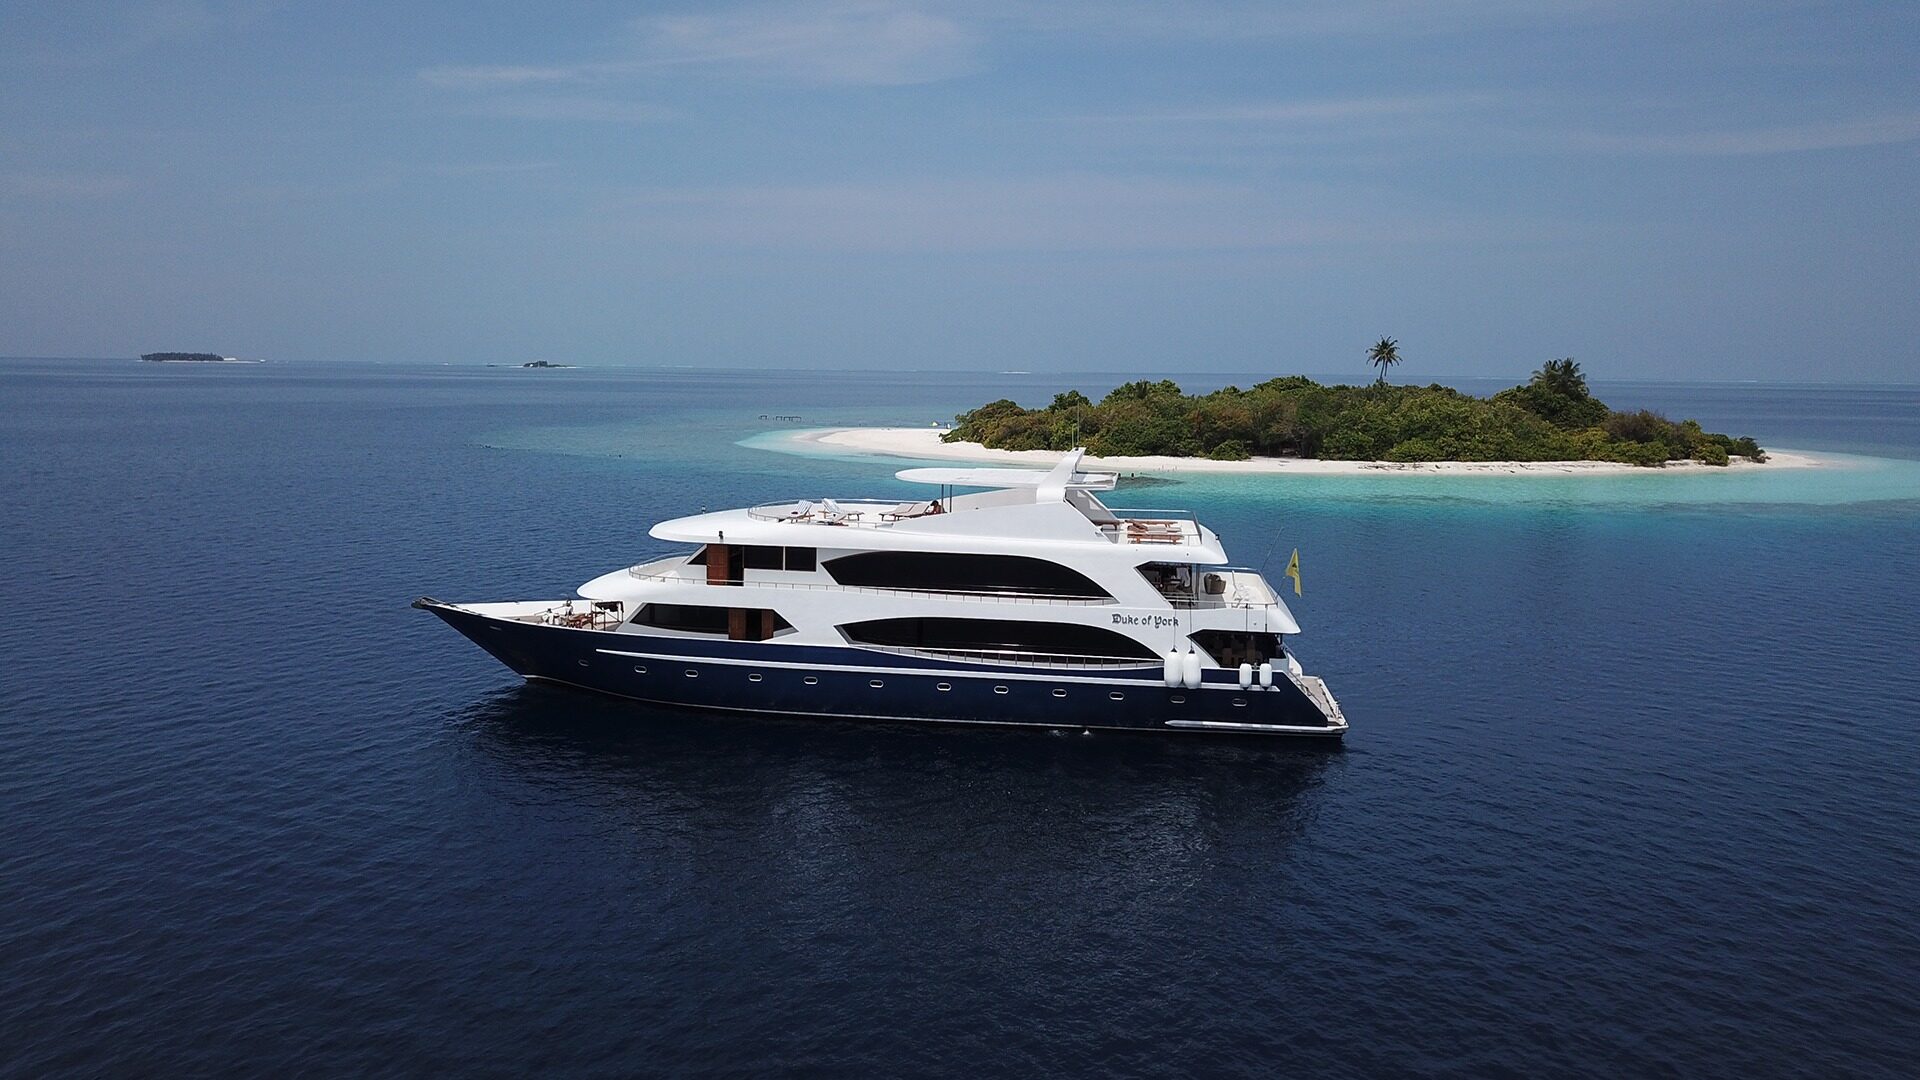 DIVING CRUISE YACHTS